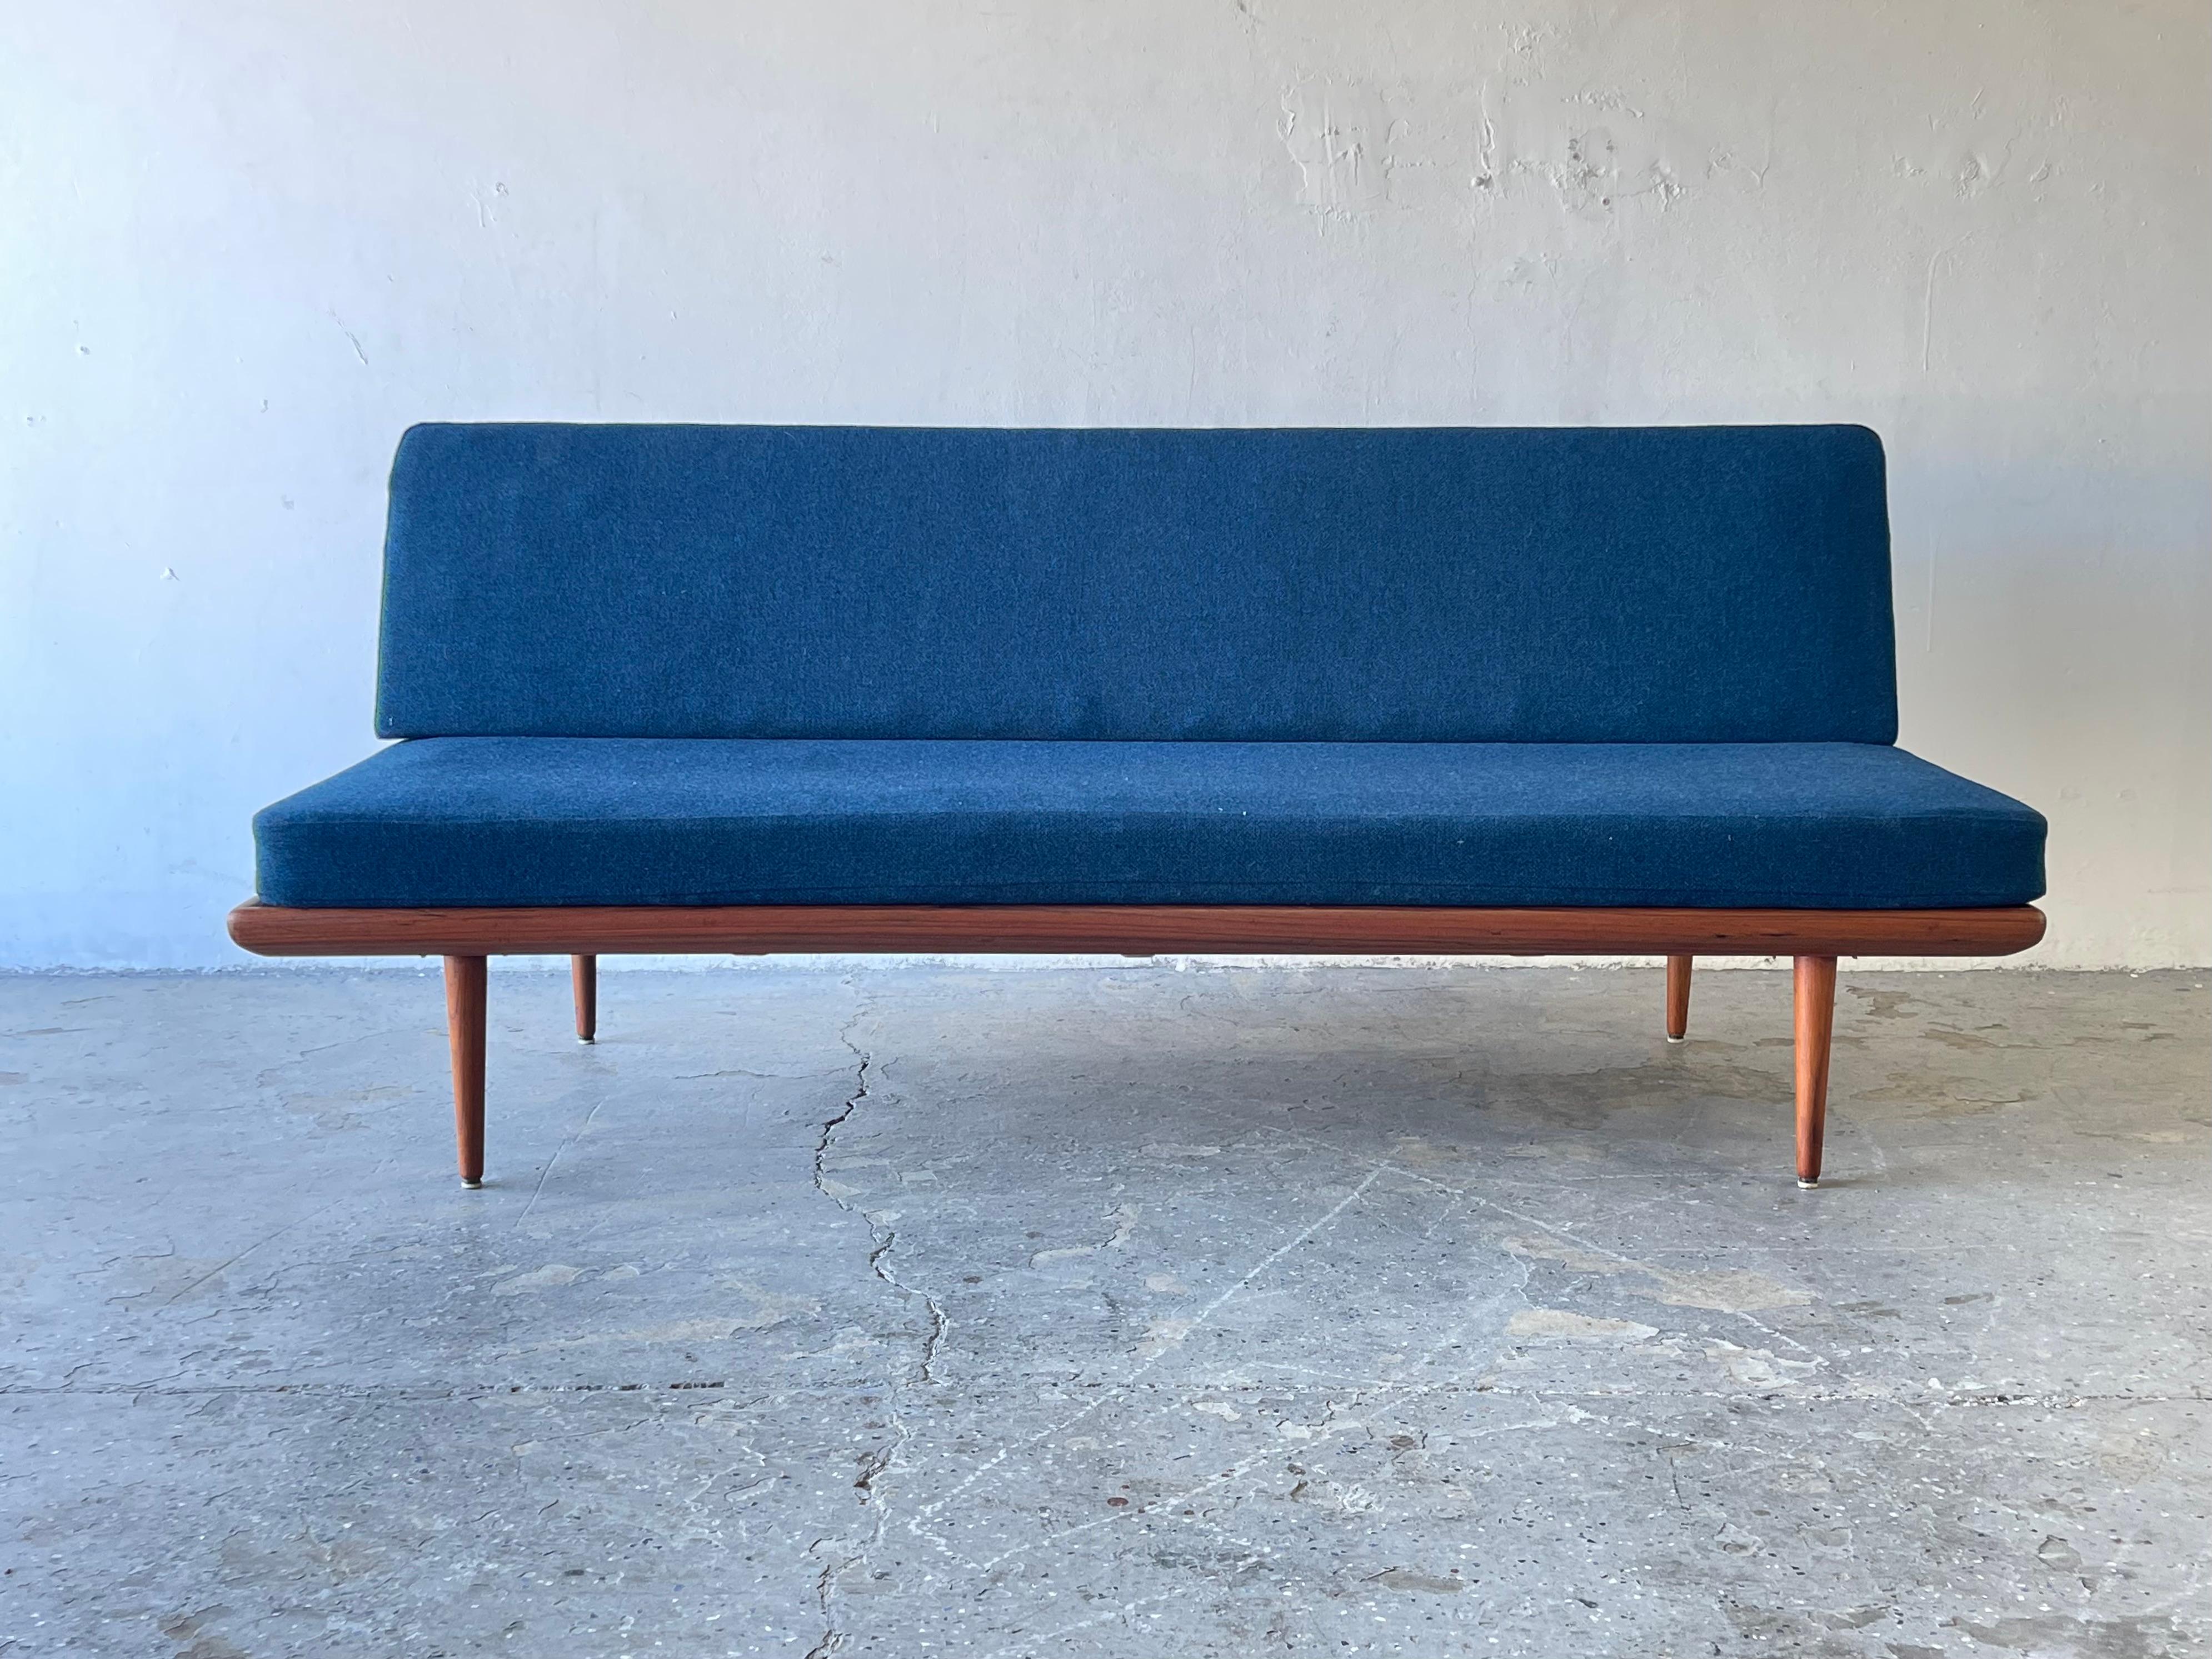 Beautiful sleek Mid-century design. Original blue wool upholstery and spring cushions with Danish modern teak wooden frame. This sofa would look great as is with any mid century modern, Danish or Contemporary modern home.

 Upholstery is in